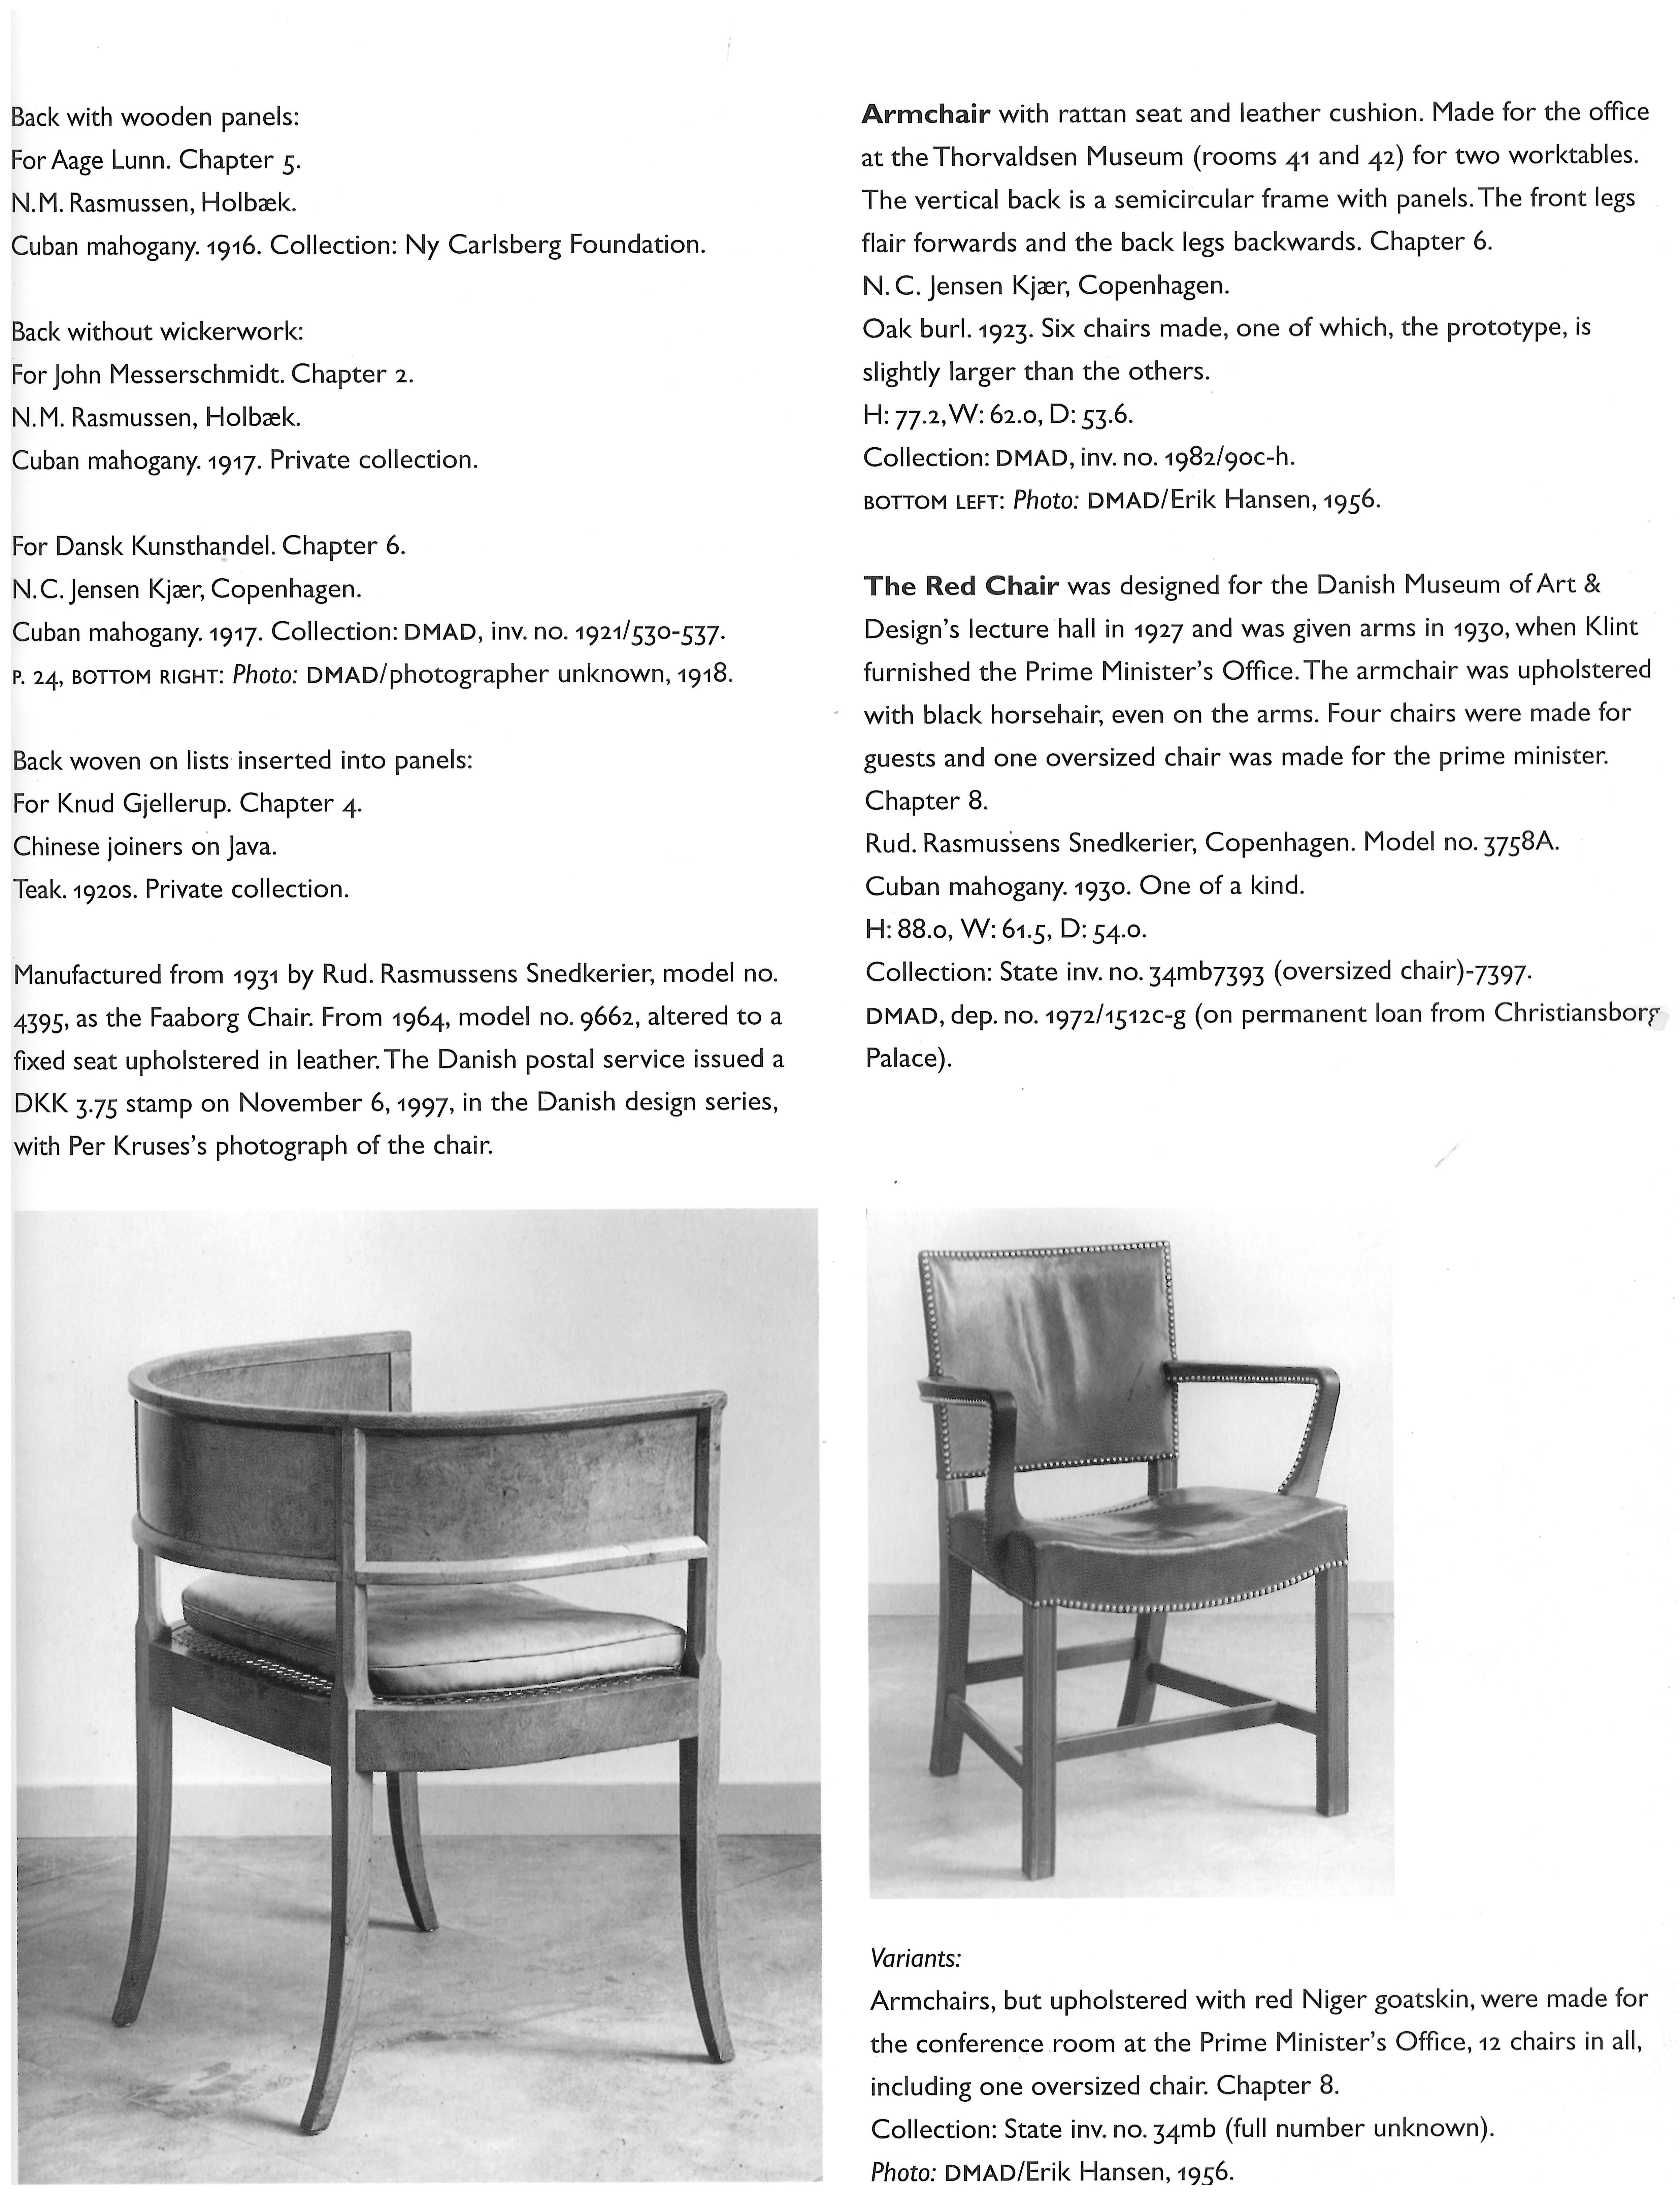 Kaare Klint, Rare Armchairs with Back Wood Panels, 1916 8